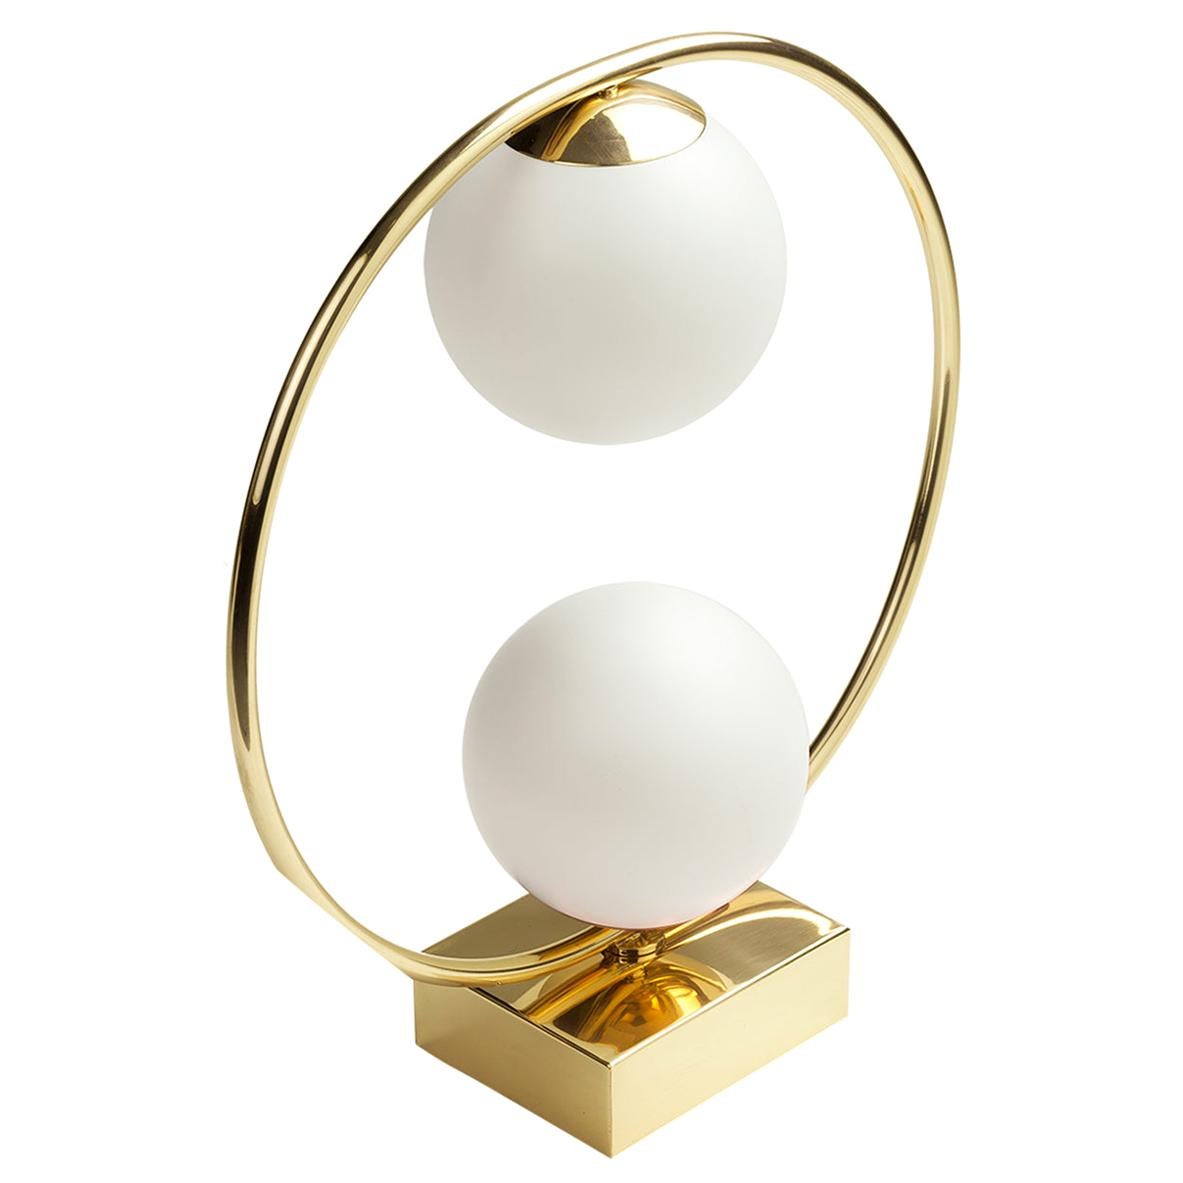 Art Deco Inspired Contemporary Loop II Table Lamp Polished Brass